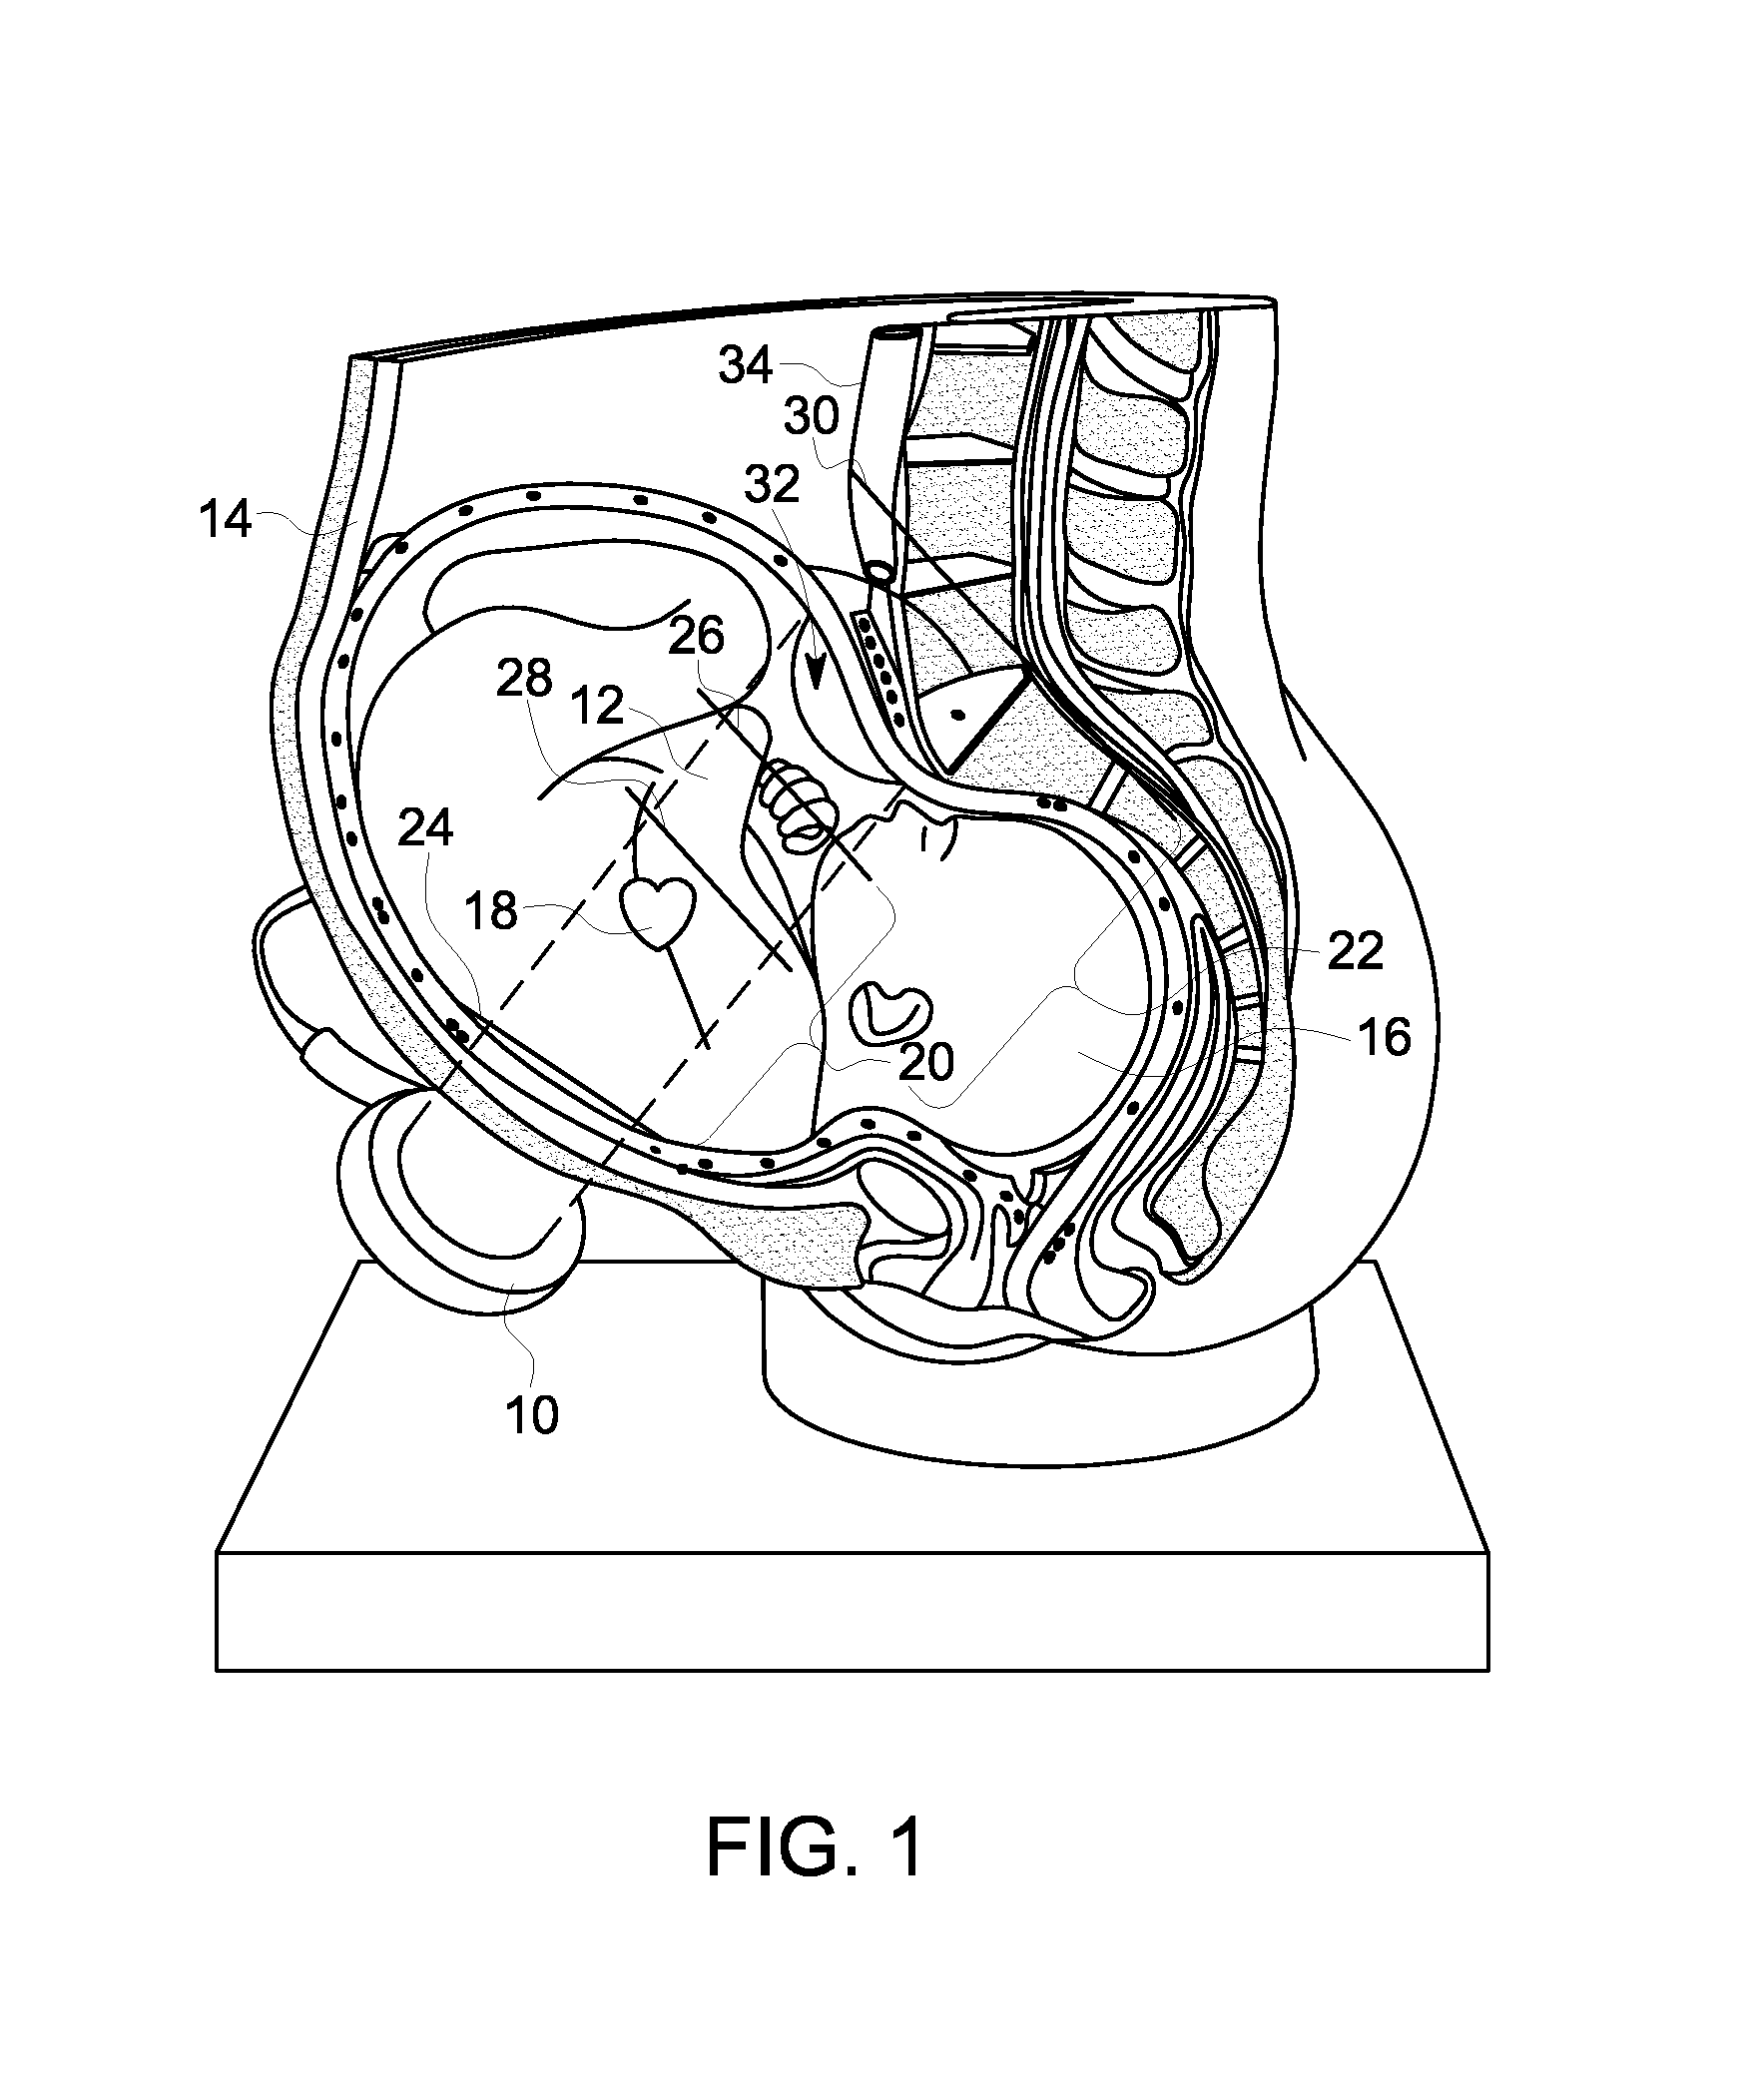 Method and device for fetal heart rate monitoring with maternal contribution detection